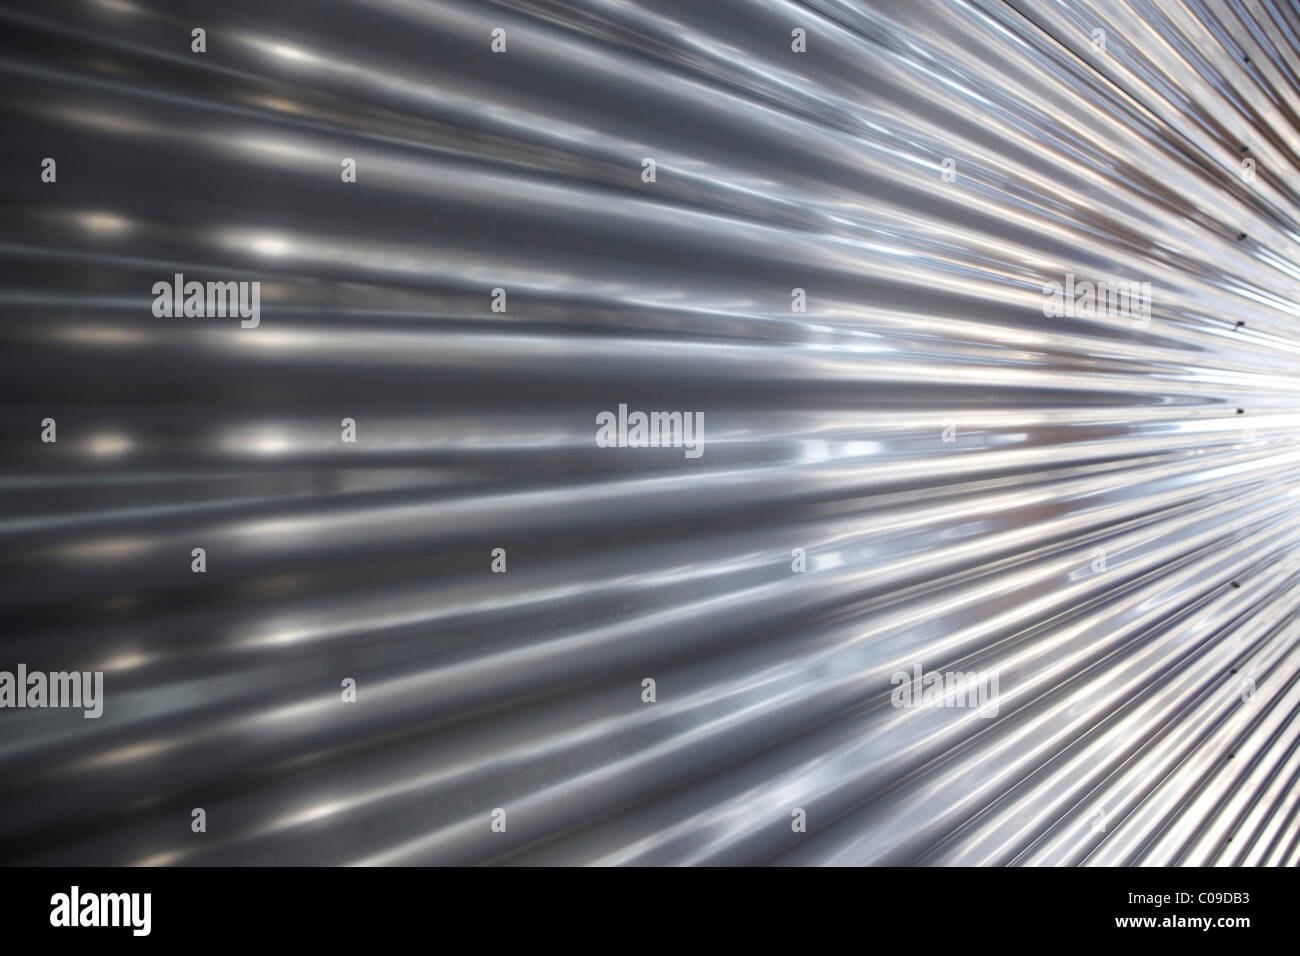 Shiny corrugated metal facade, perspective Stock Photo